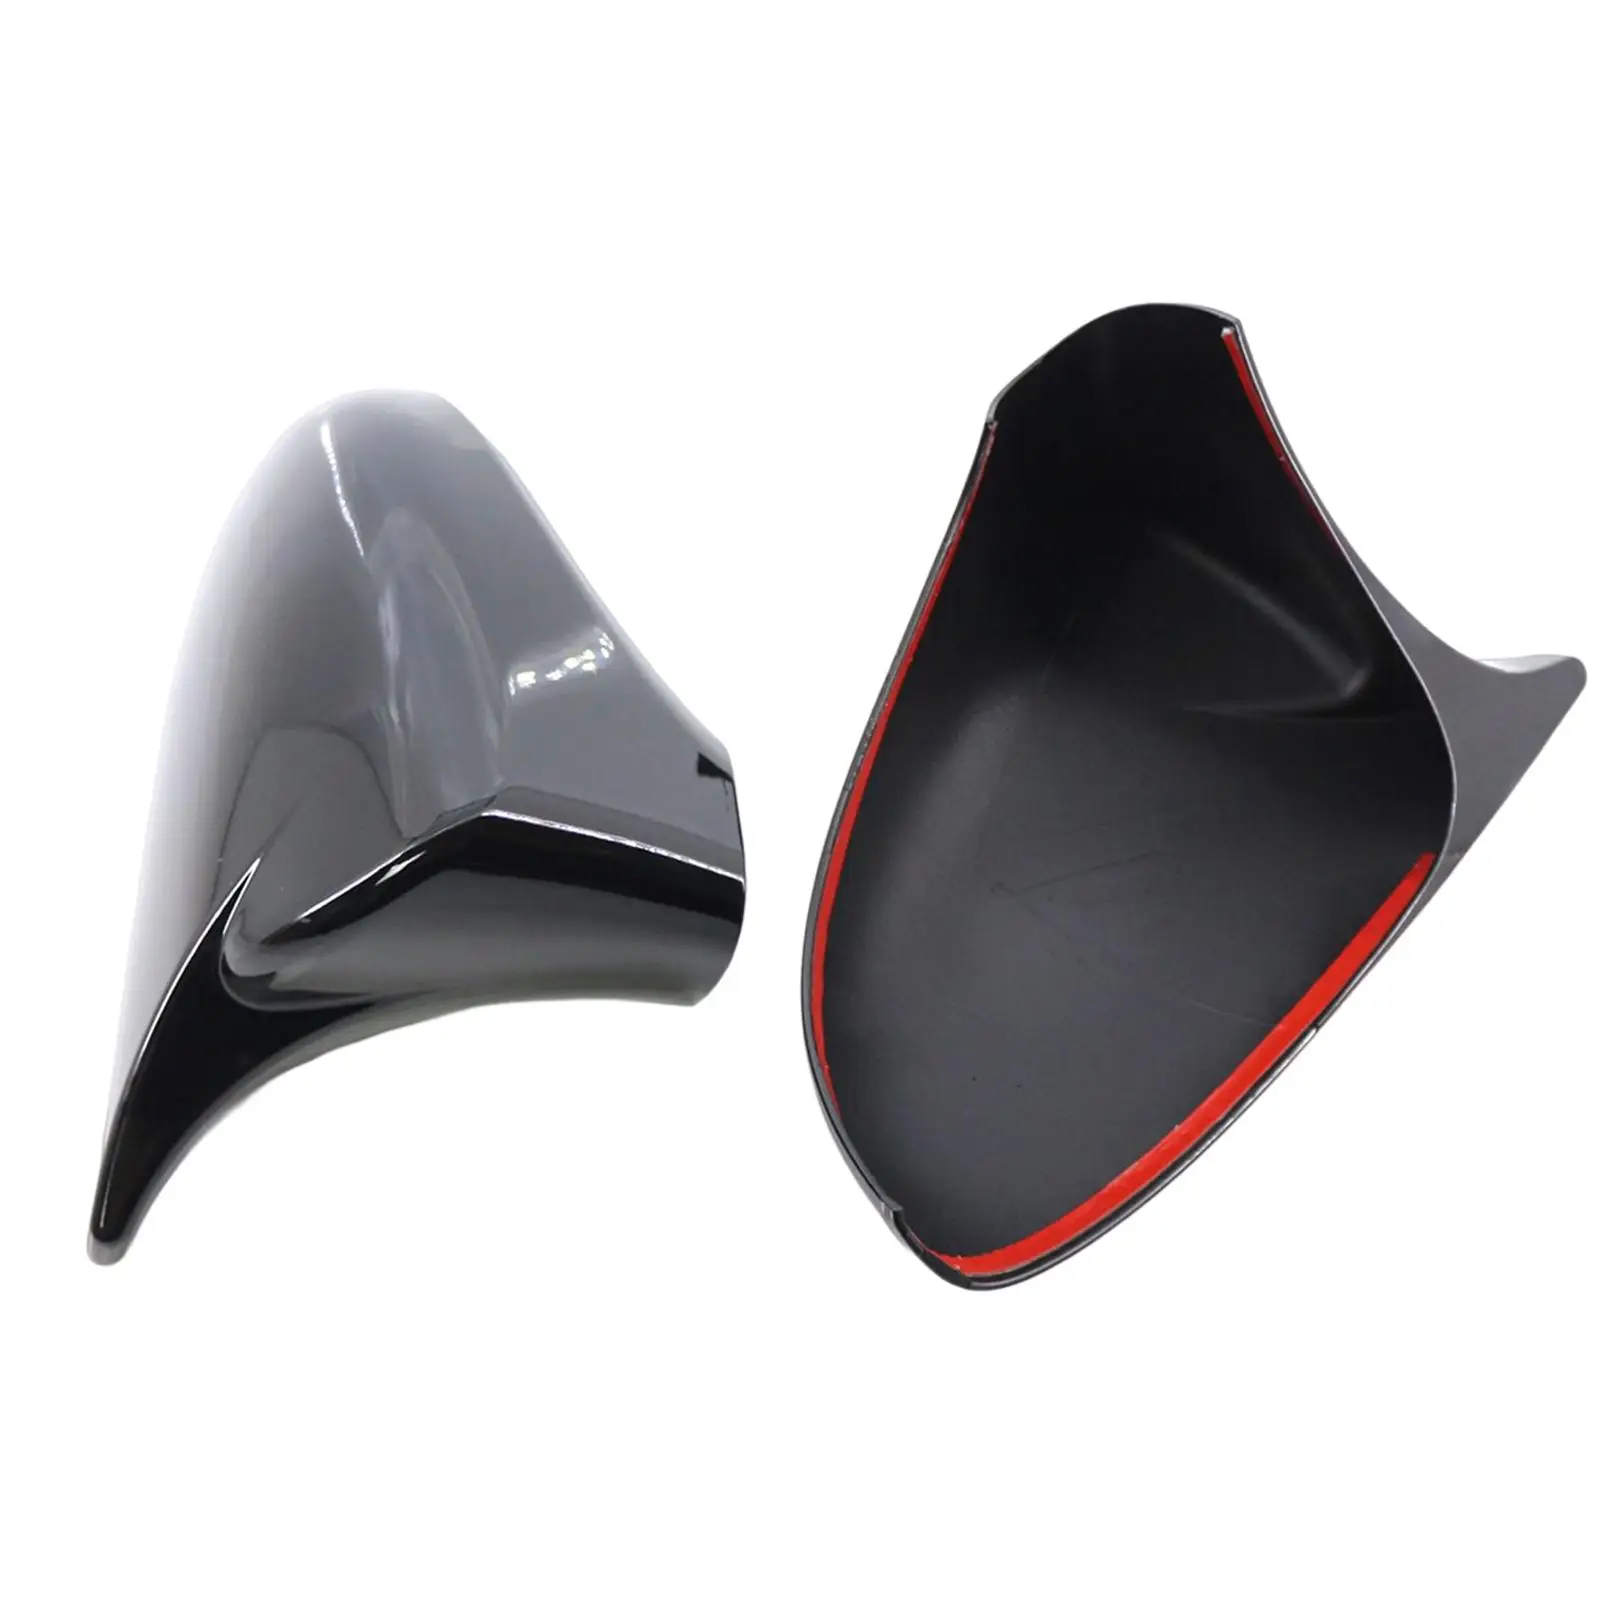 2Pcs Auto Side View Mirror Covers 8794A30E00B1 for GS Gsf ES